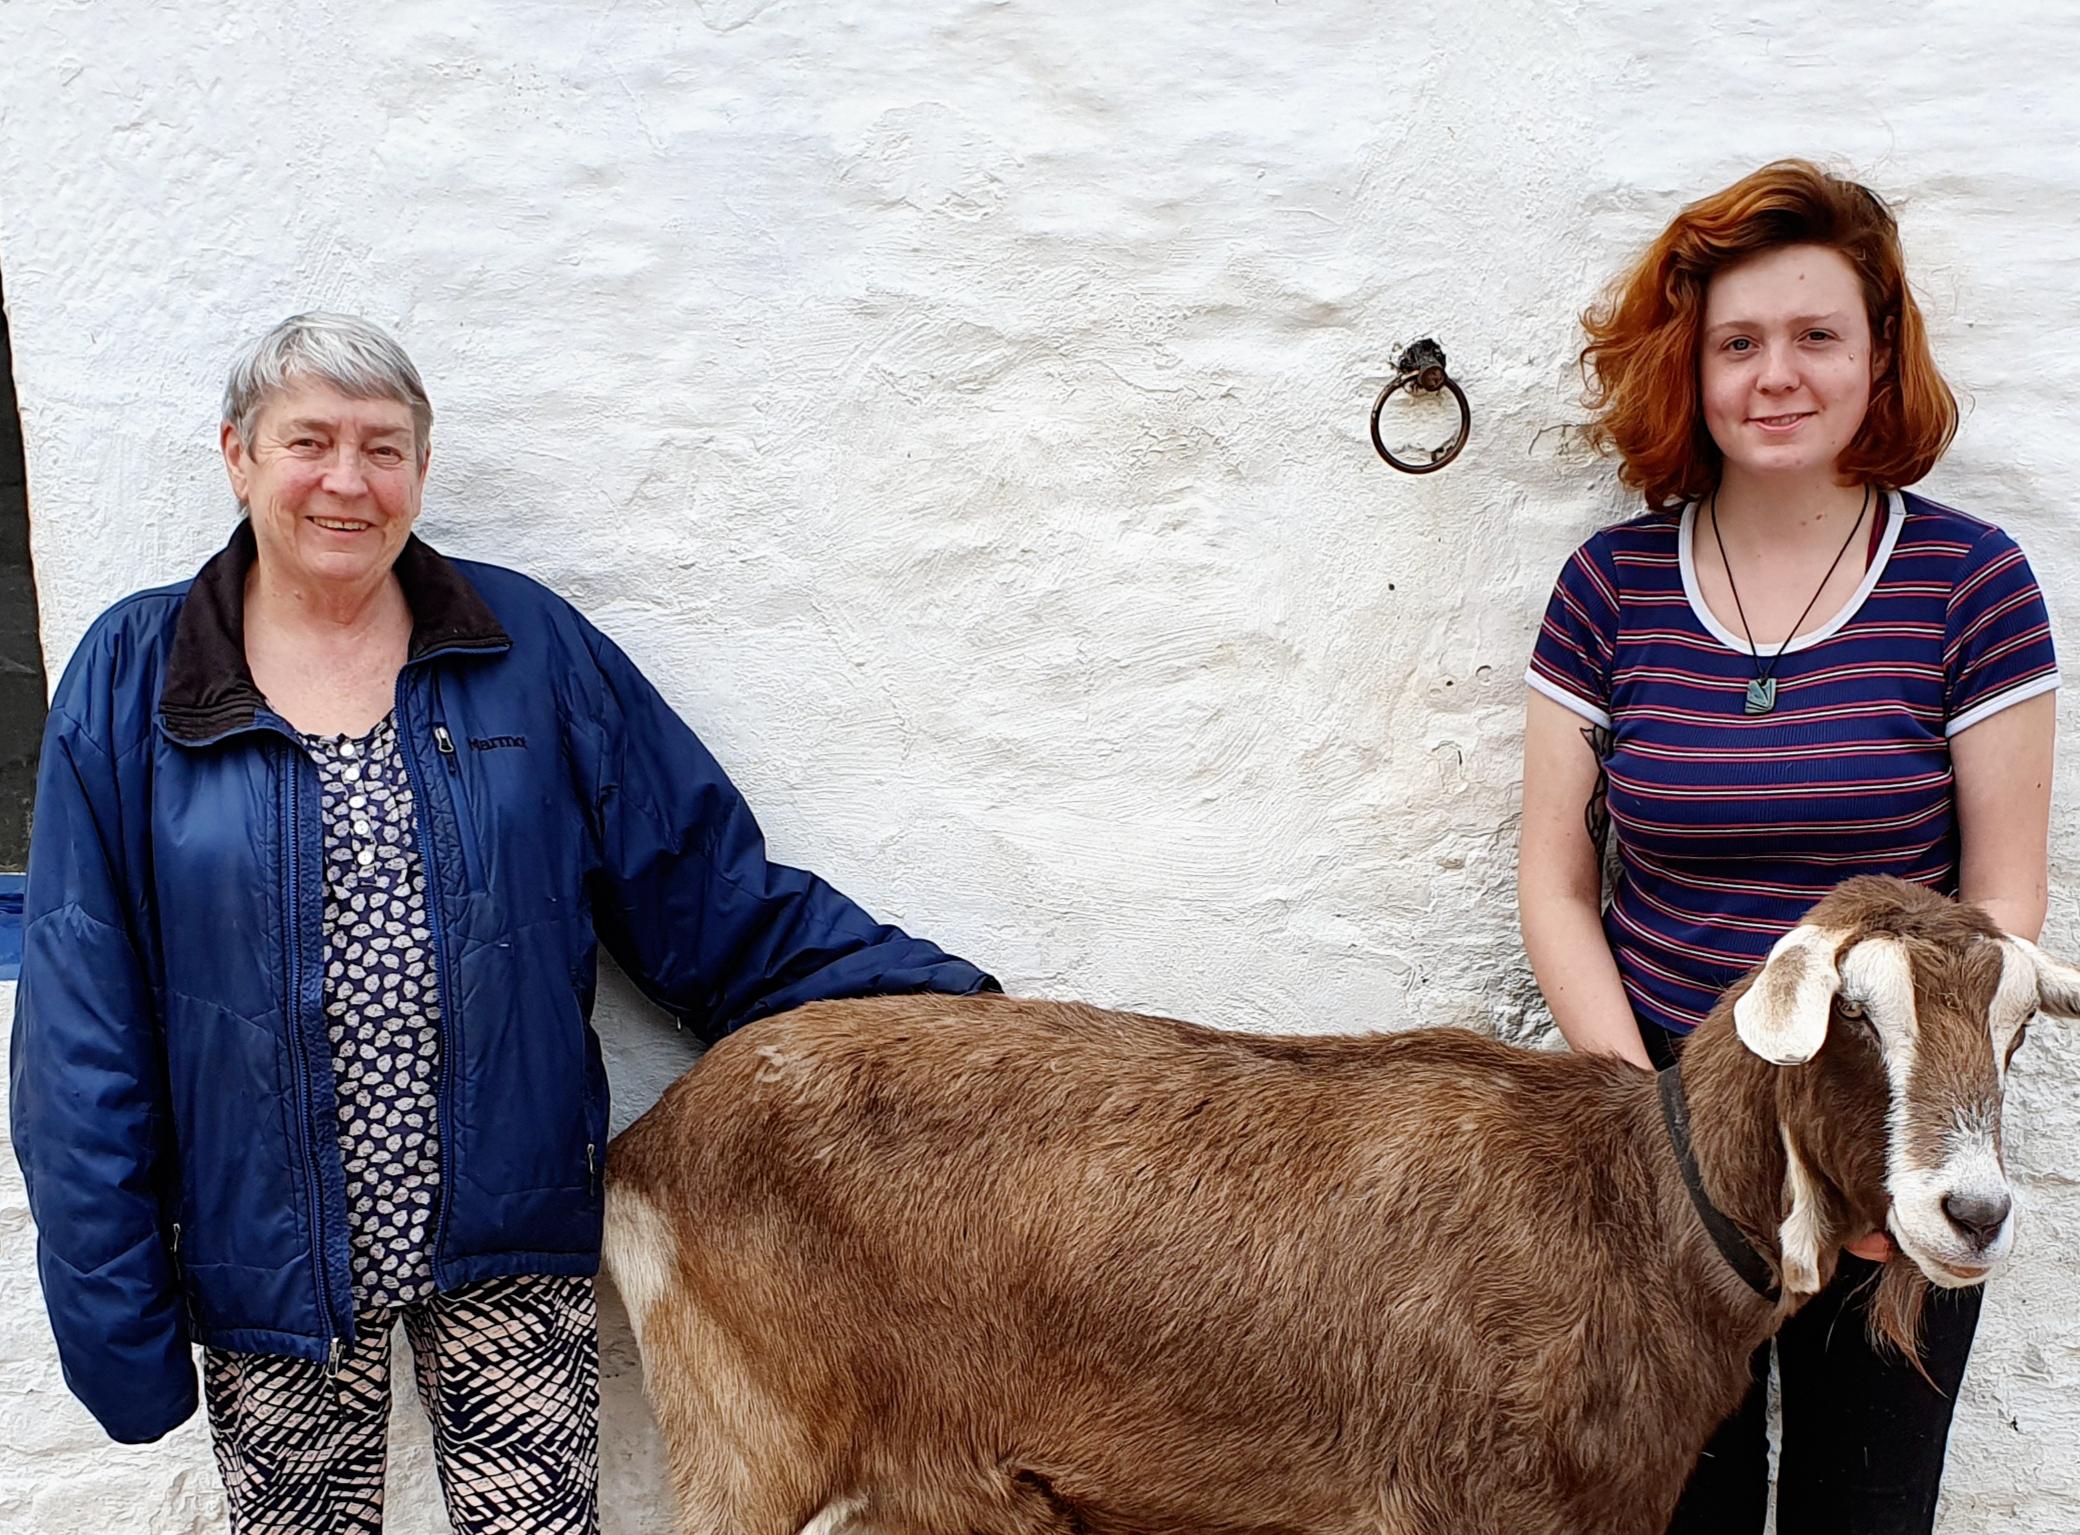 Juanita and Beth with Bertie the goat